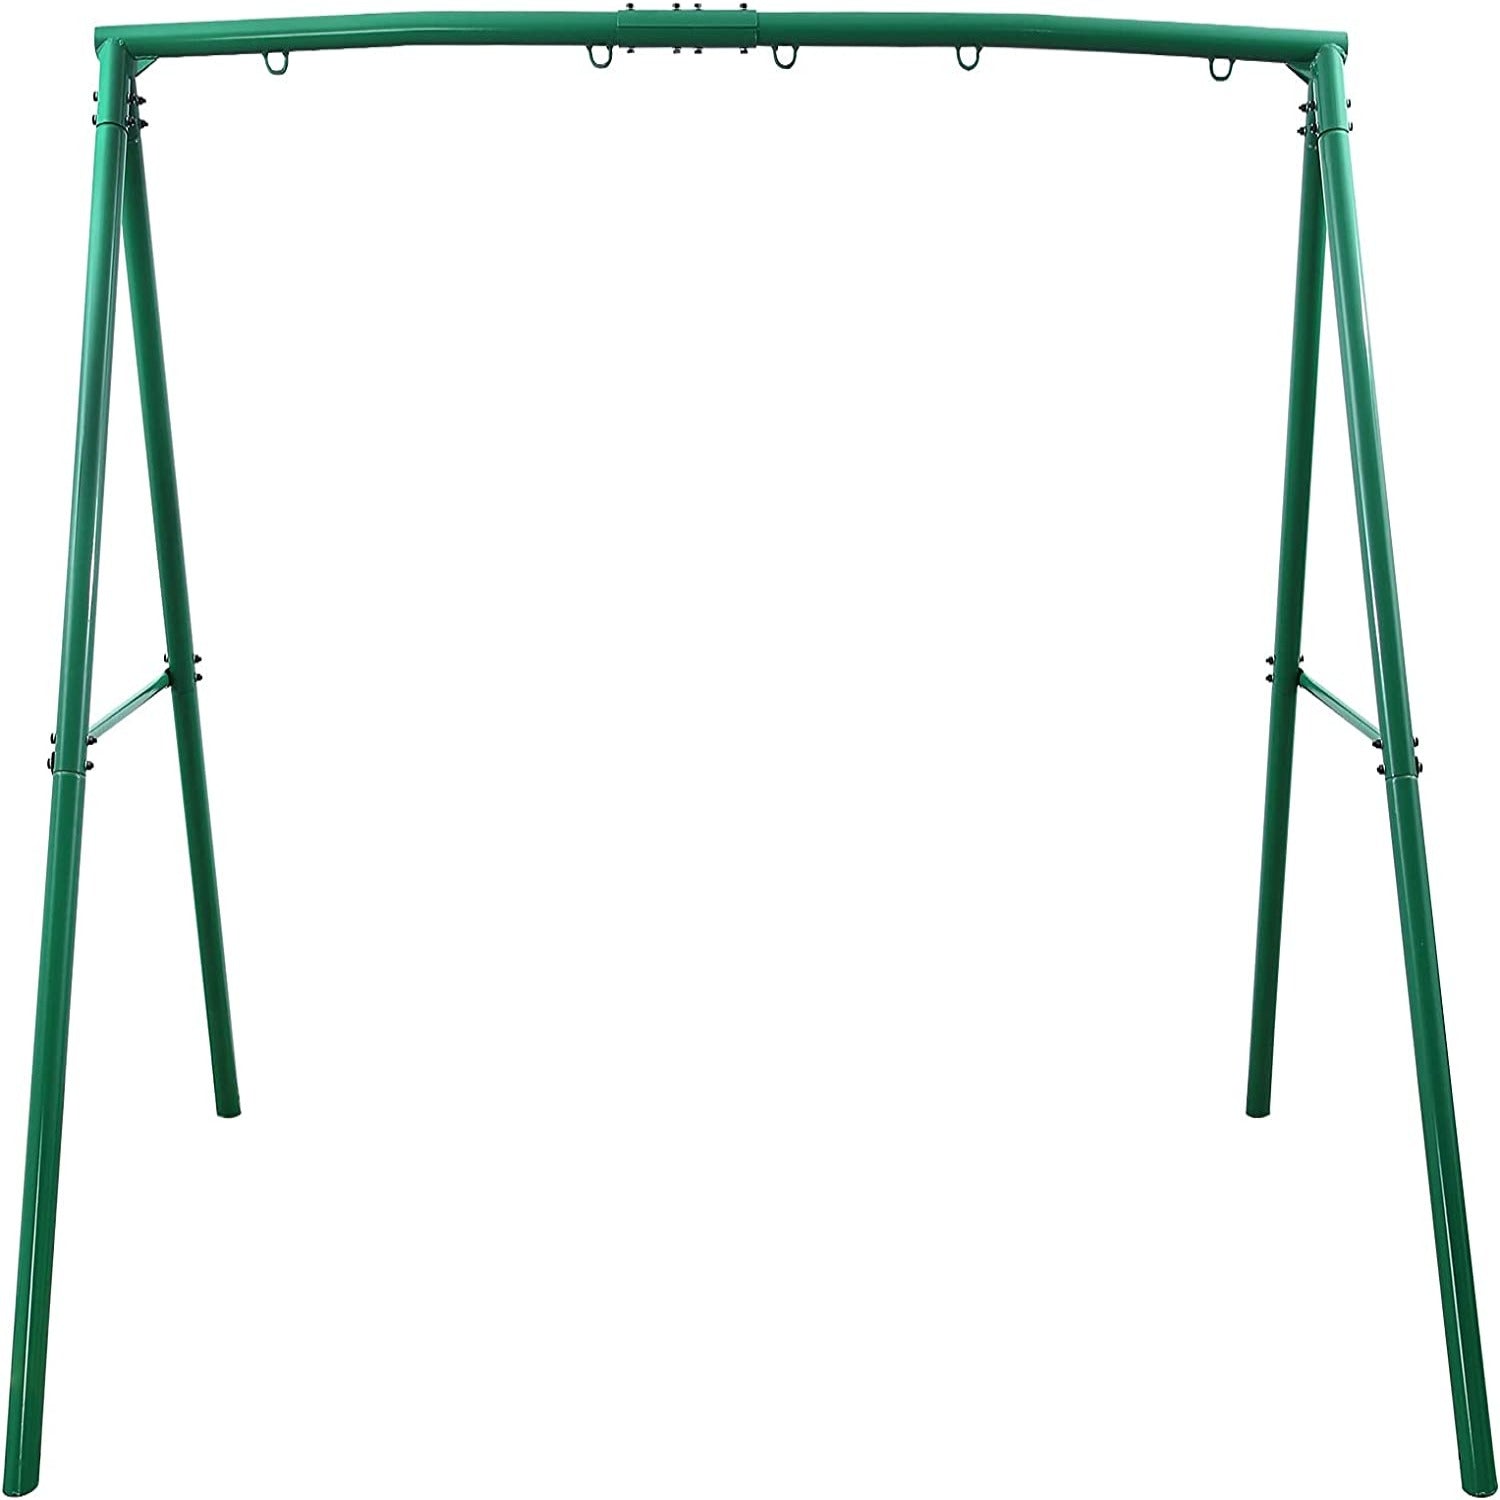 Trekassy 440lbs Extra Large Metal A-Frame Swing Stand/Swing Frame Fits for Most Swings